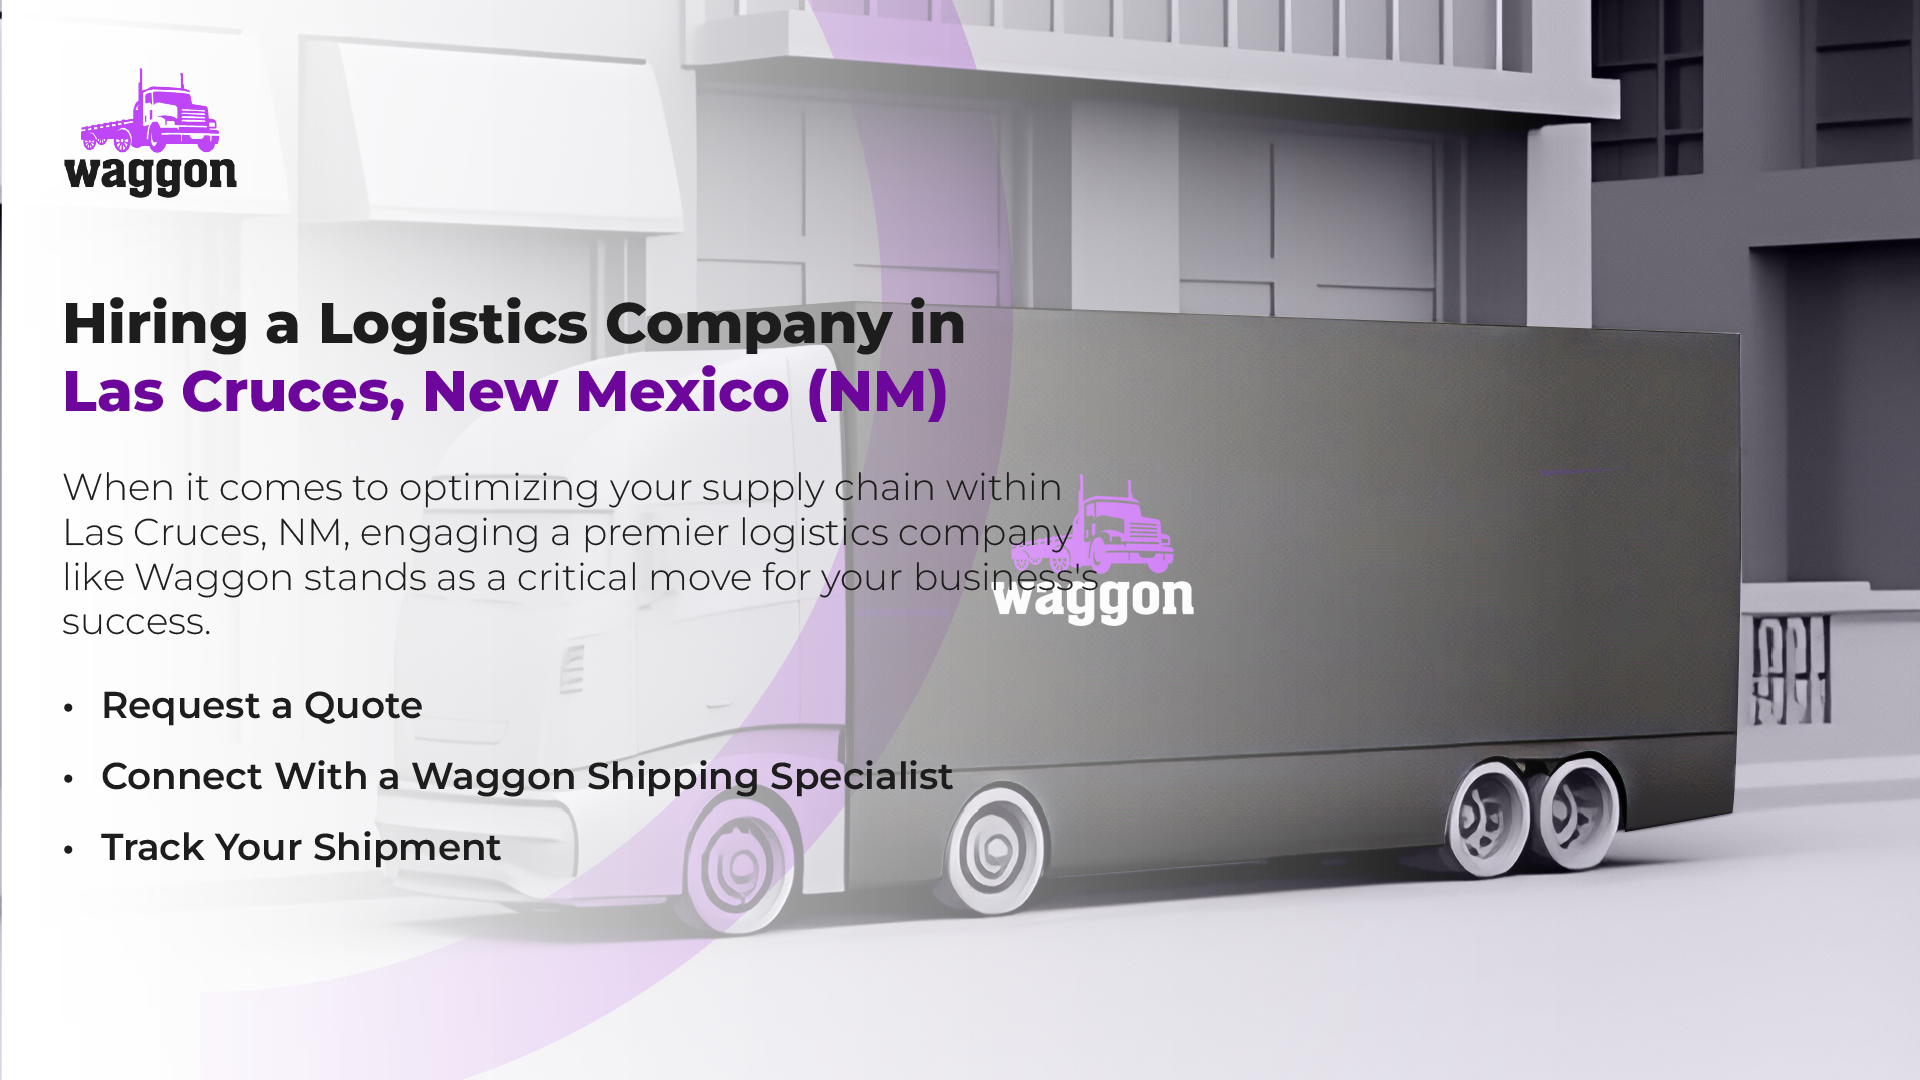 Hiring A Logistics Company in Las Cruces, New Mexico (NM)